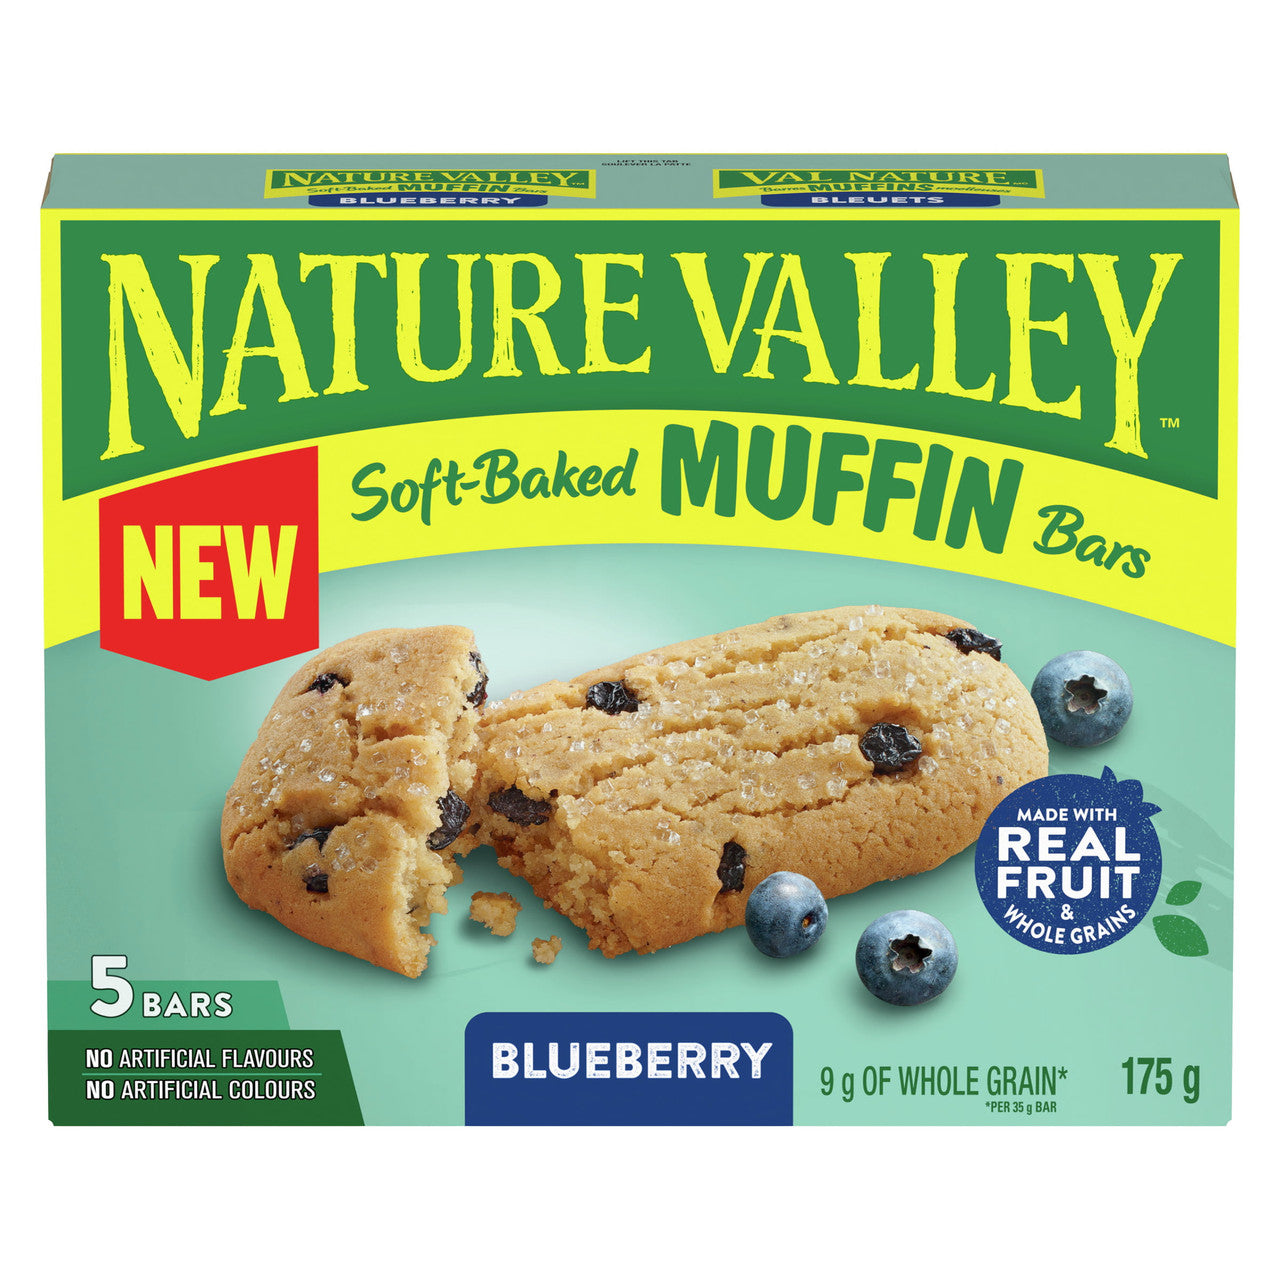 Nature Valley Soft-Baked Blueberry Muffin Bars, 5 Bars, 175g/6 oz. Box {Imported from Canada}